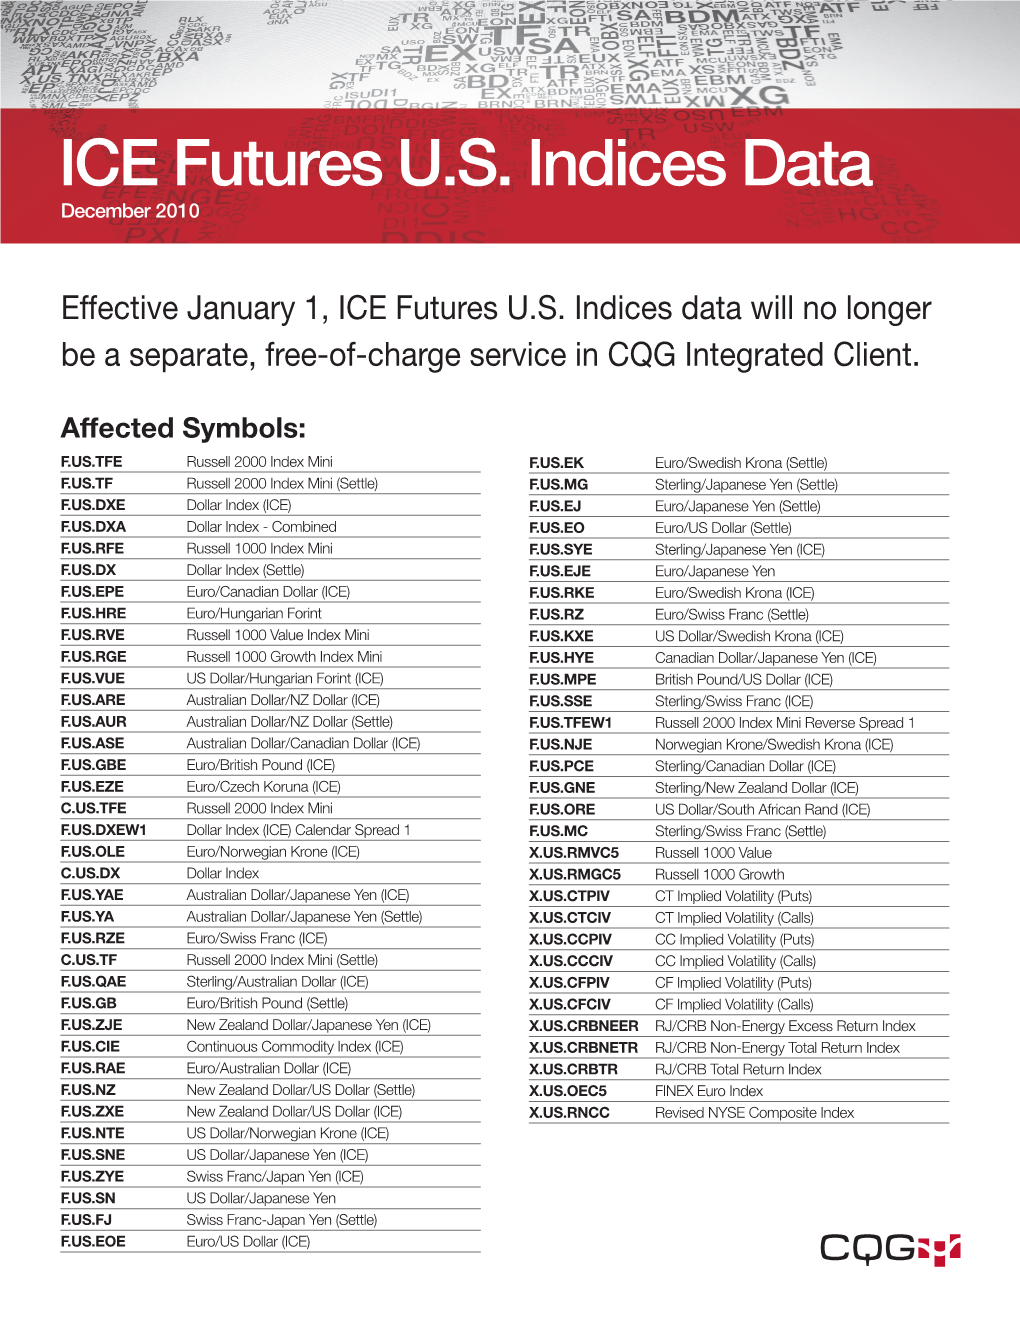 ICE Futures U.S. Indices Data Will No Longer Be a Separate, Free-Of-Charge Service in CQG Integrated Client